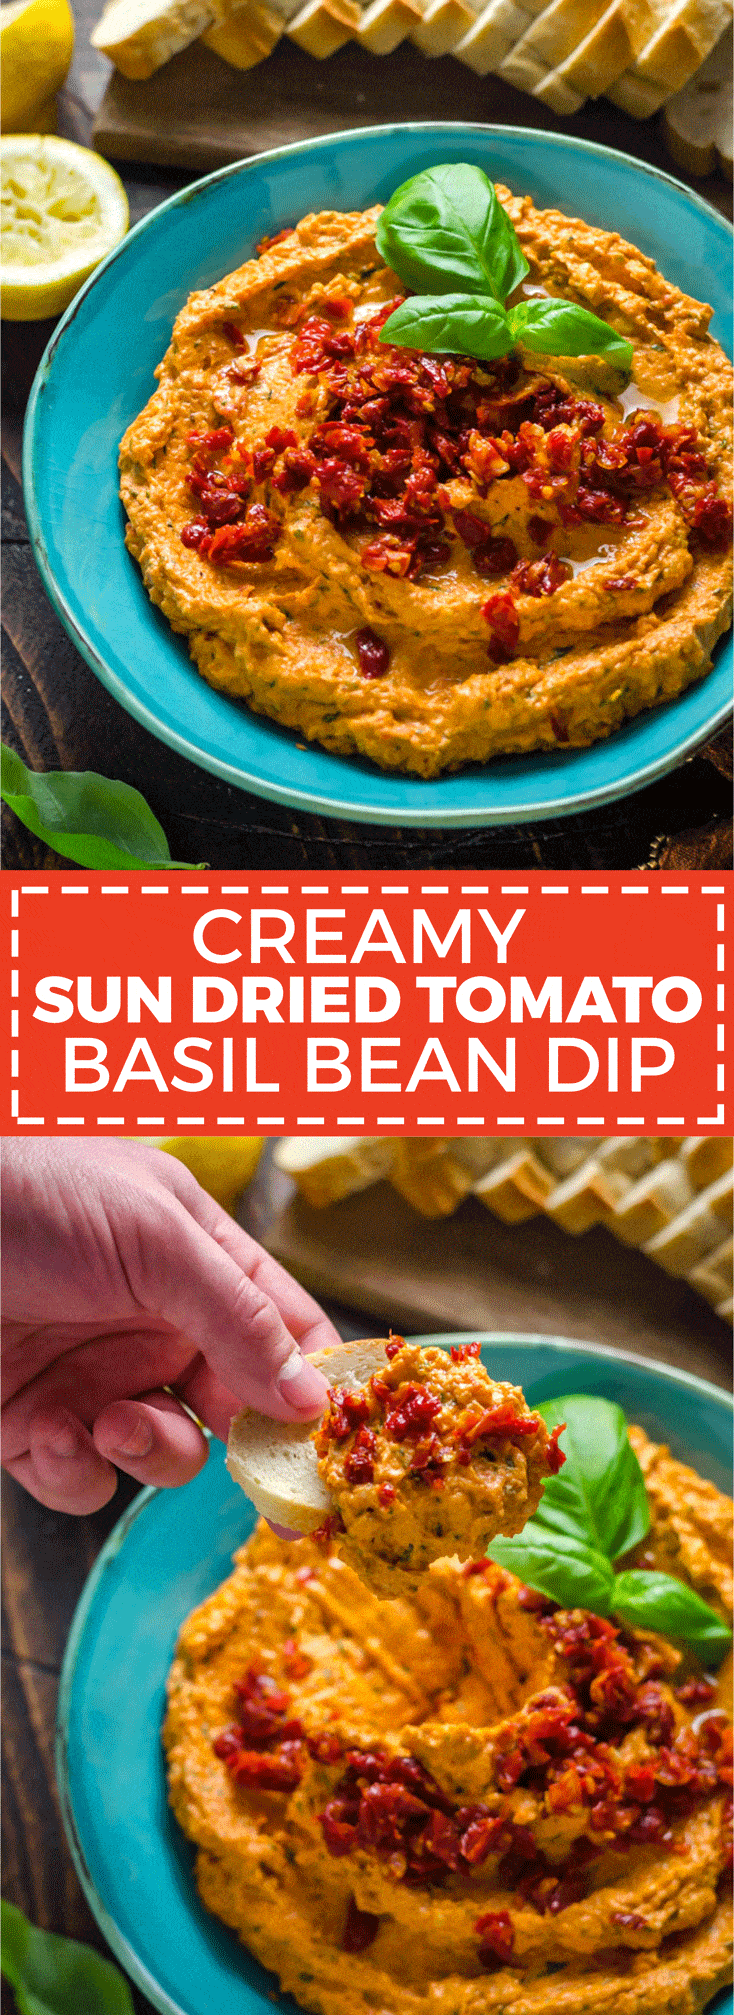 Creamy Sun Dried Tomato Basil Bean Dip. This white bean dip features cream cheese, sun dried tomatoes, lemon juice, fresh basil, and garlic, and comes together in minutes! It's the perfect spread for summer. | hostthetoast.com